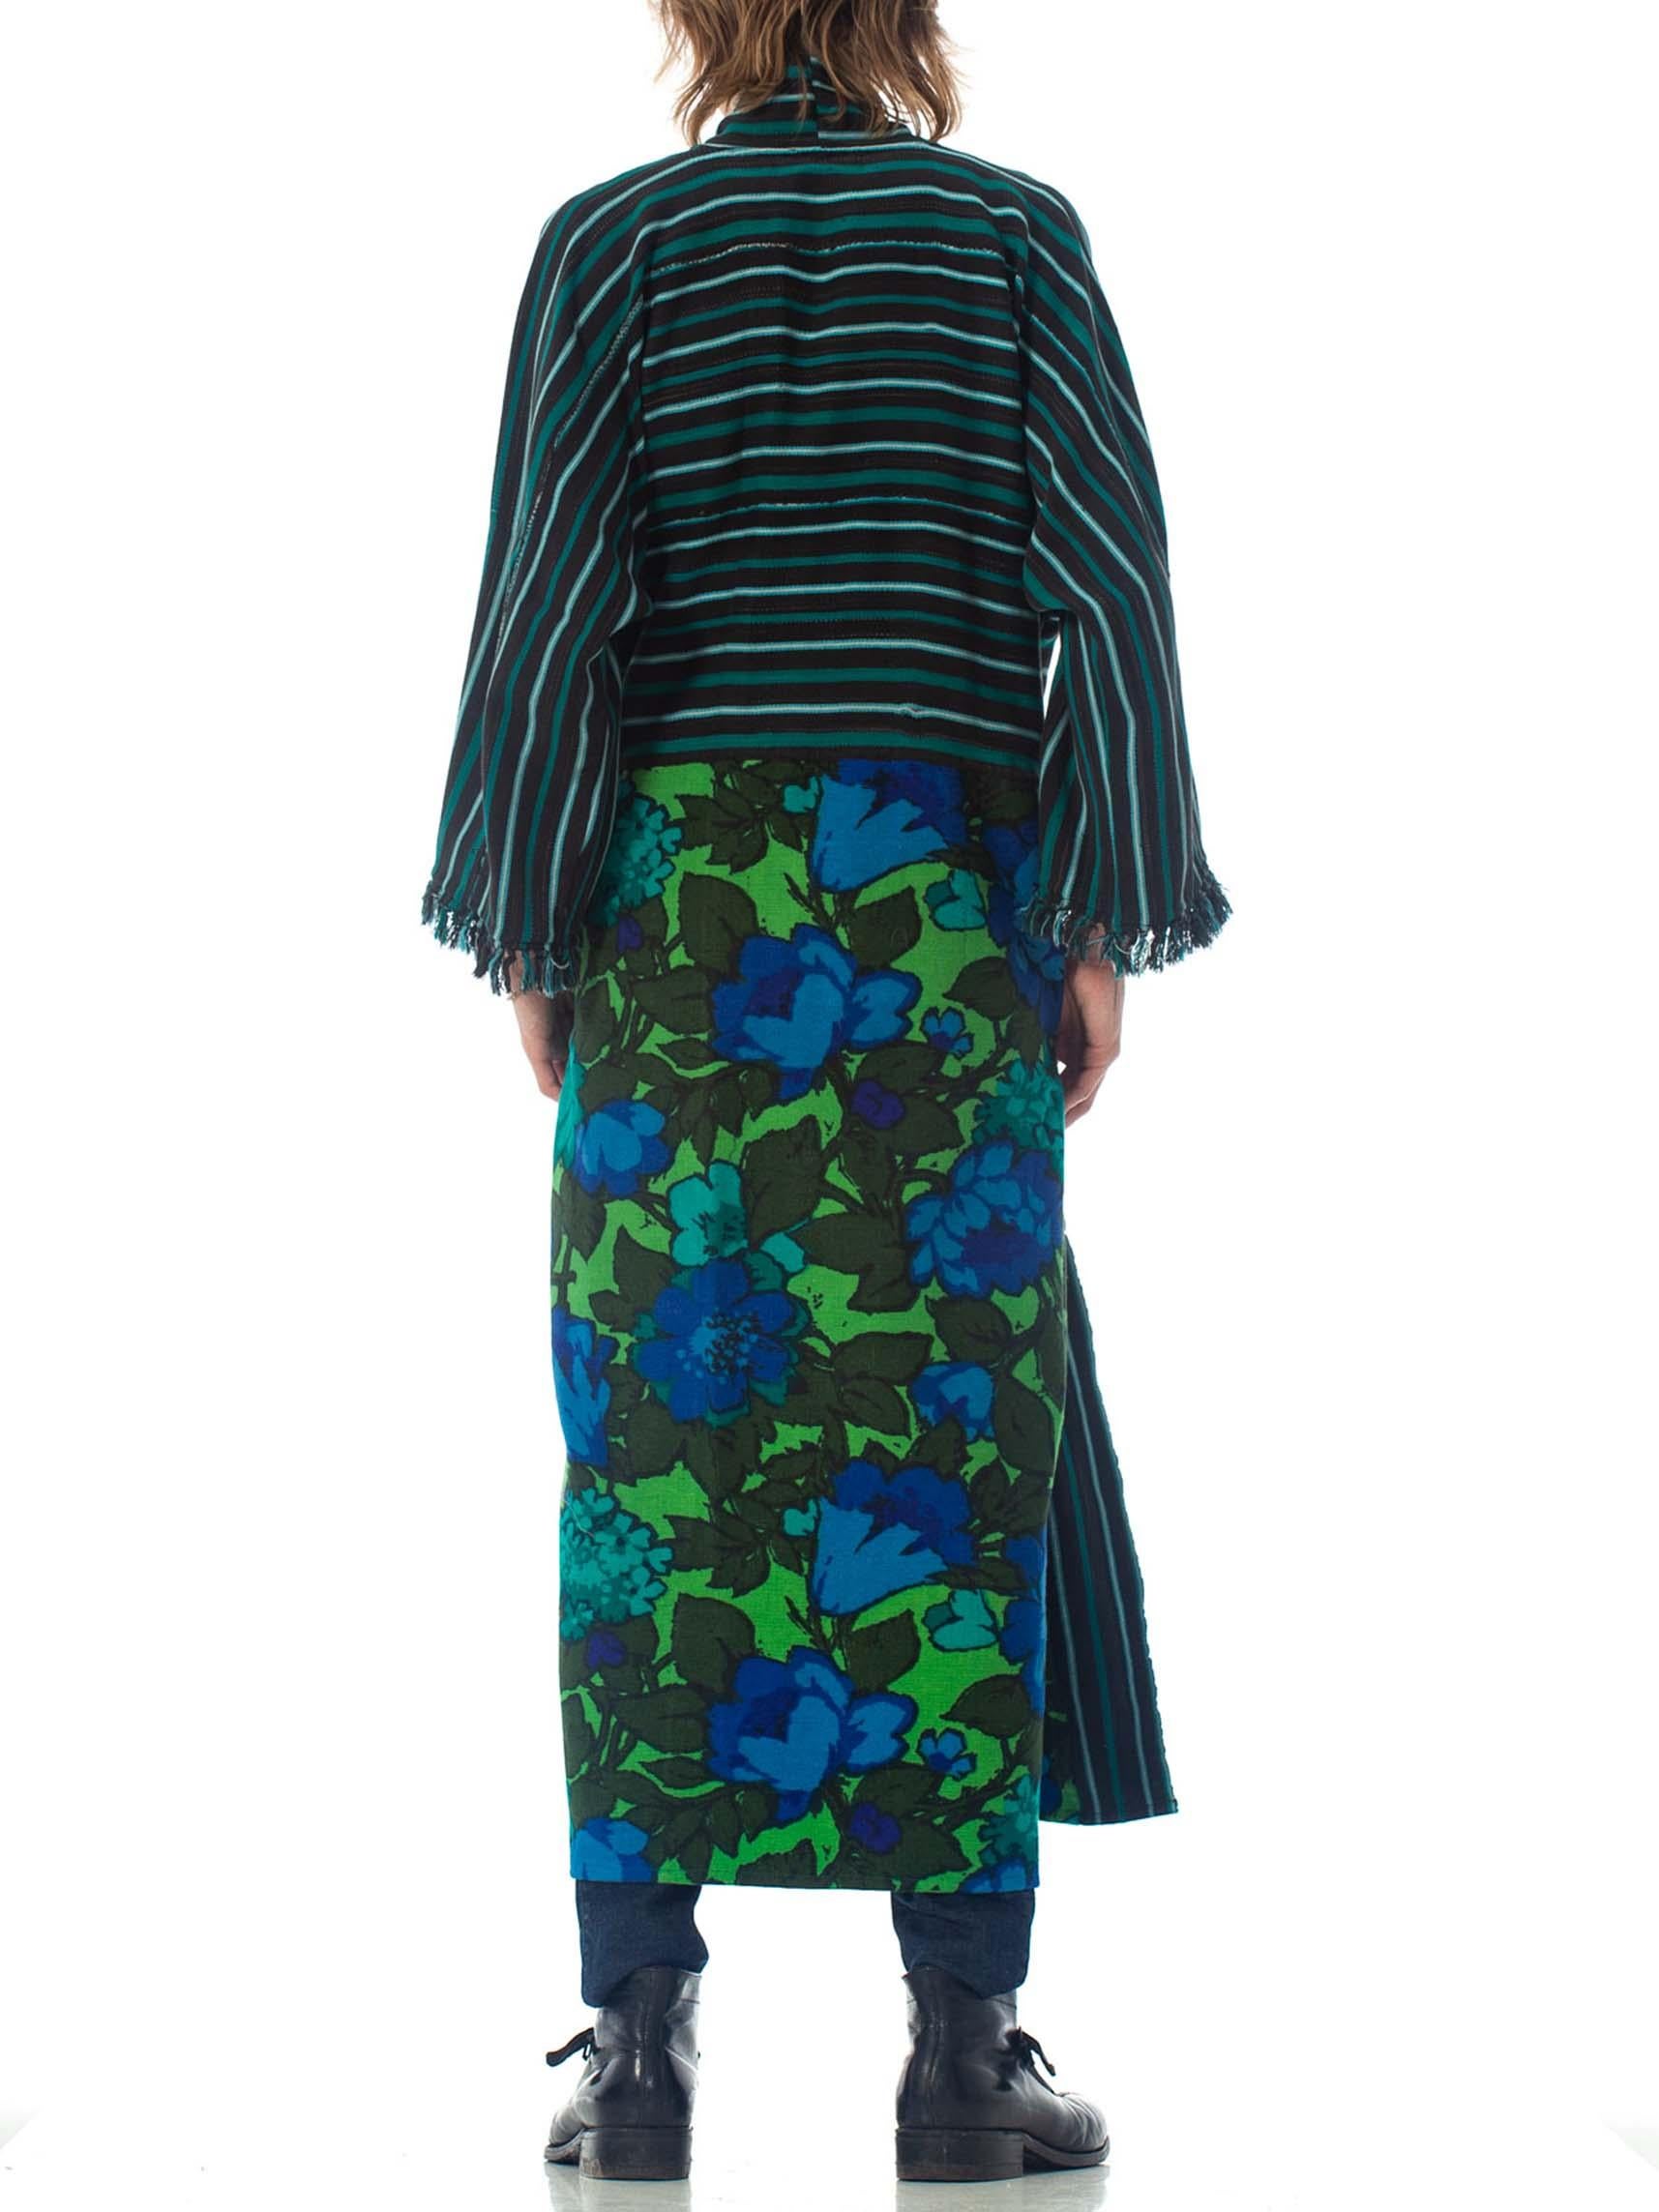 MORPHEW COLLECTION Black & Green Cotton Duster Coat Made From African Indigo 19 4